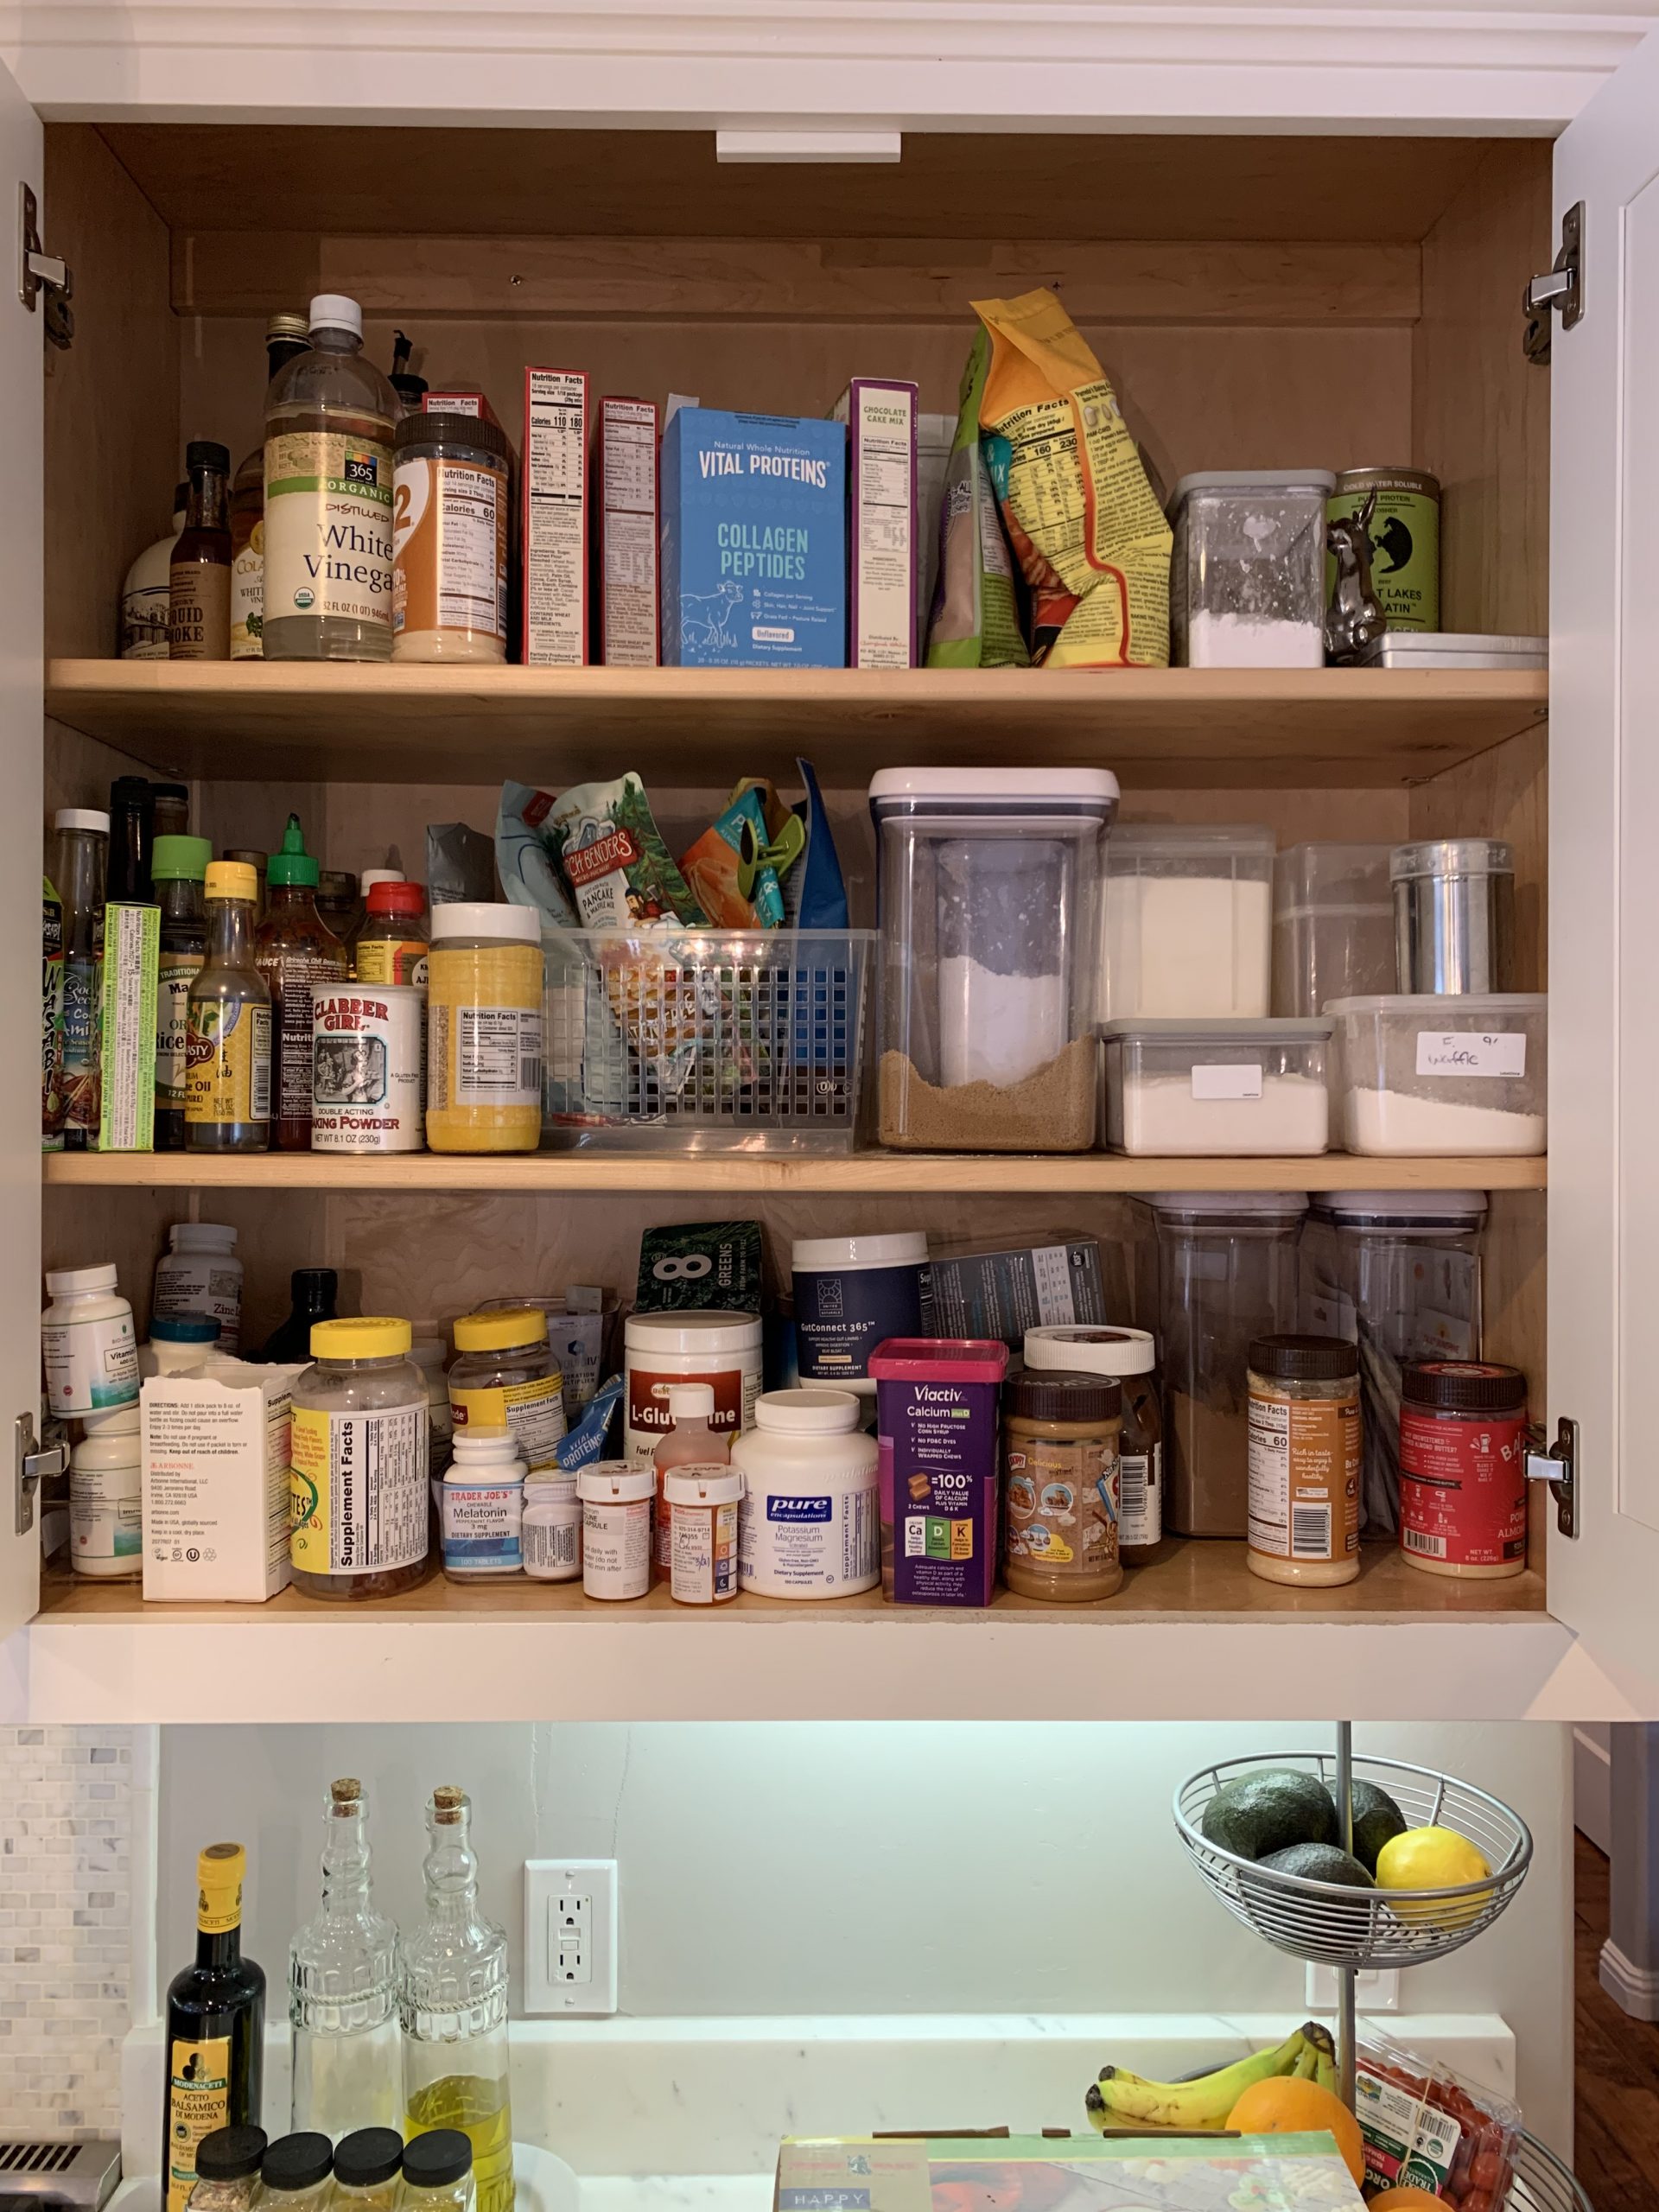 https://simplyorganized.me/wp-content/uploads/2020/01/cluttered-kitchen-cabinet-scaled.jpg